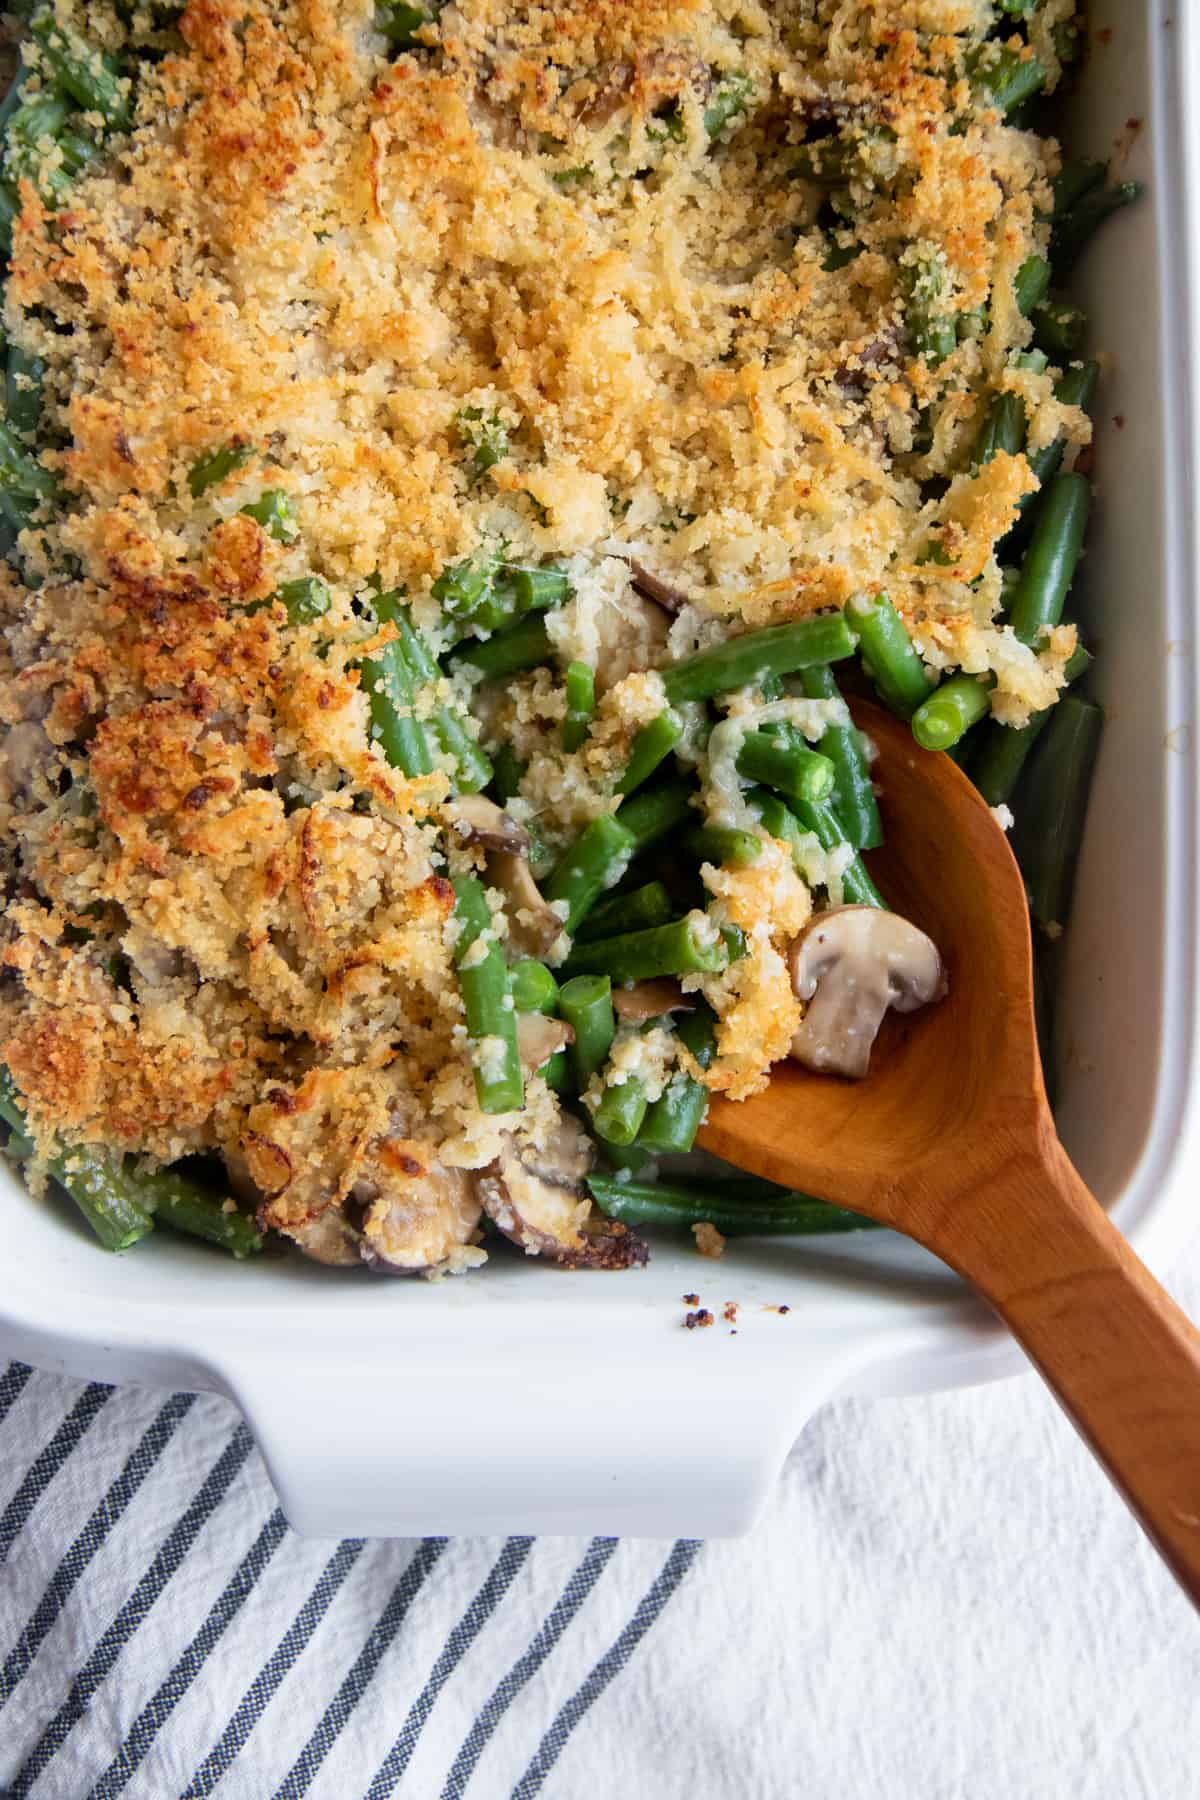 Fresh Green Bean Casserole From Scratch (with Gluten-Free and Vegan Options)